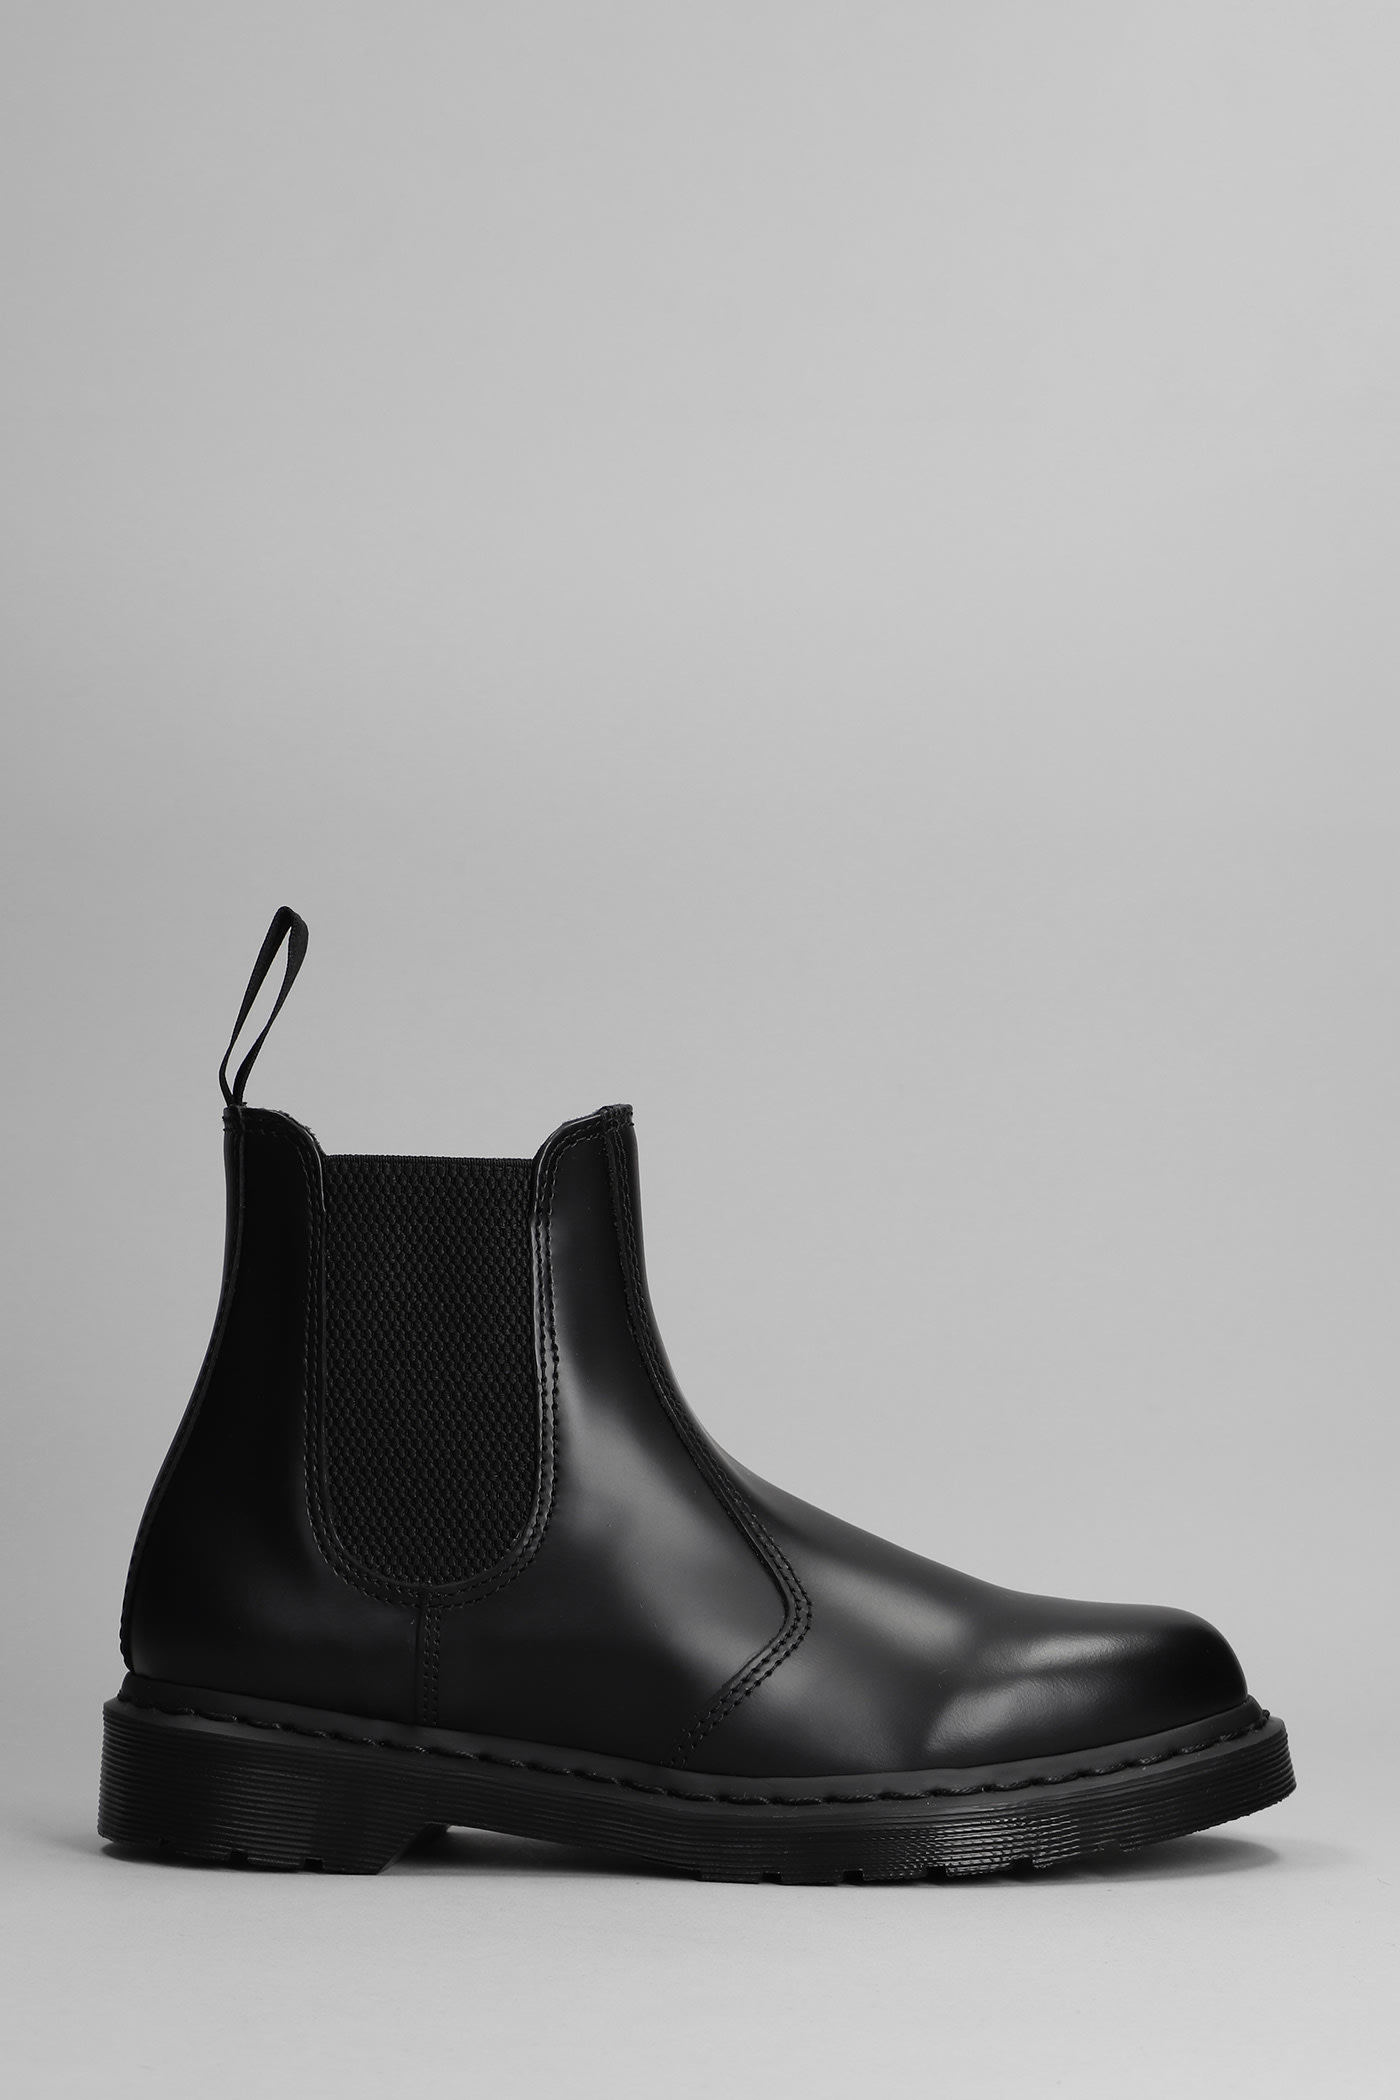 Dr. Martens 2976 Low Heels Ankle Boots In Black Leather